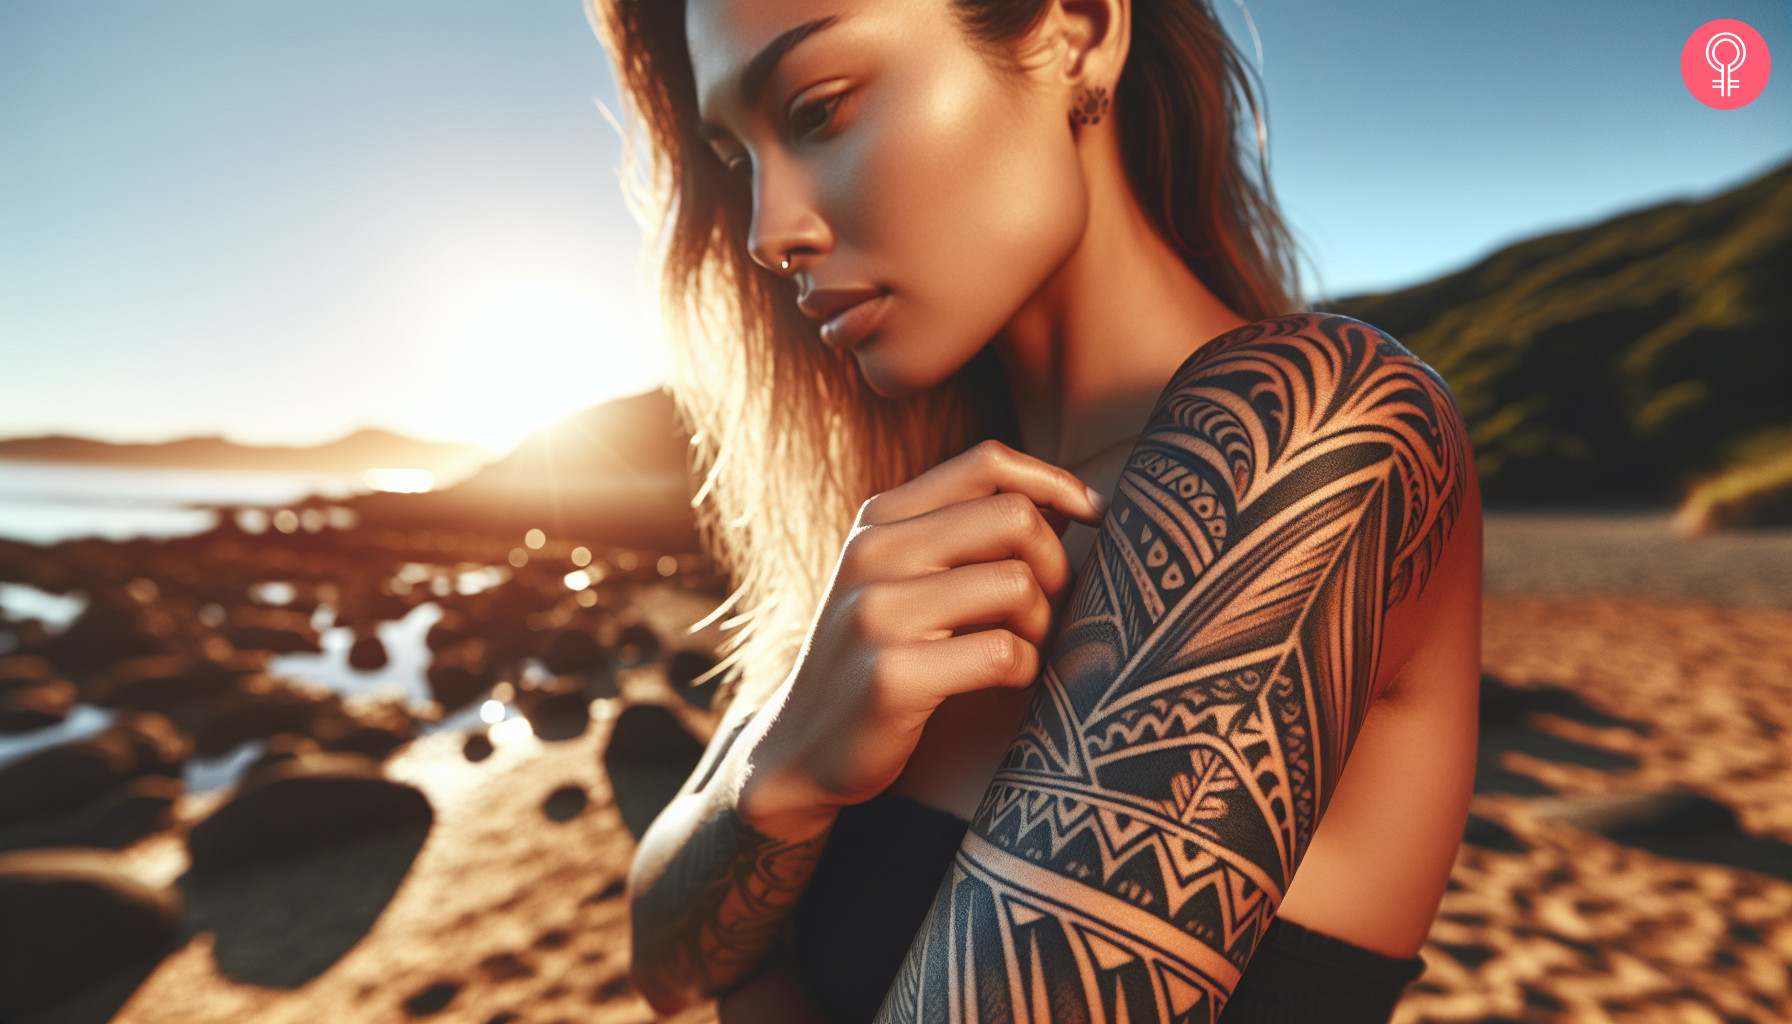 Aesthetic maori tattoo on the upper arm of a woman